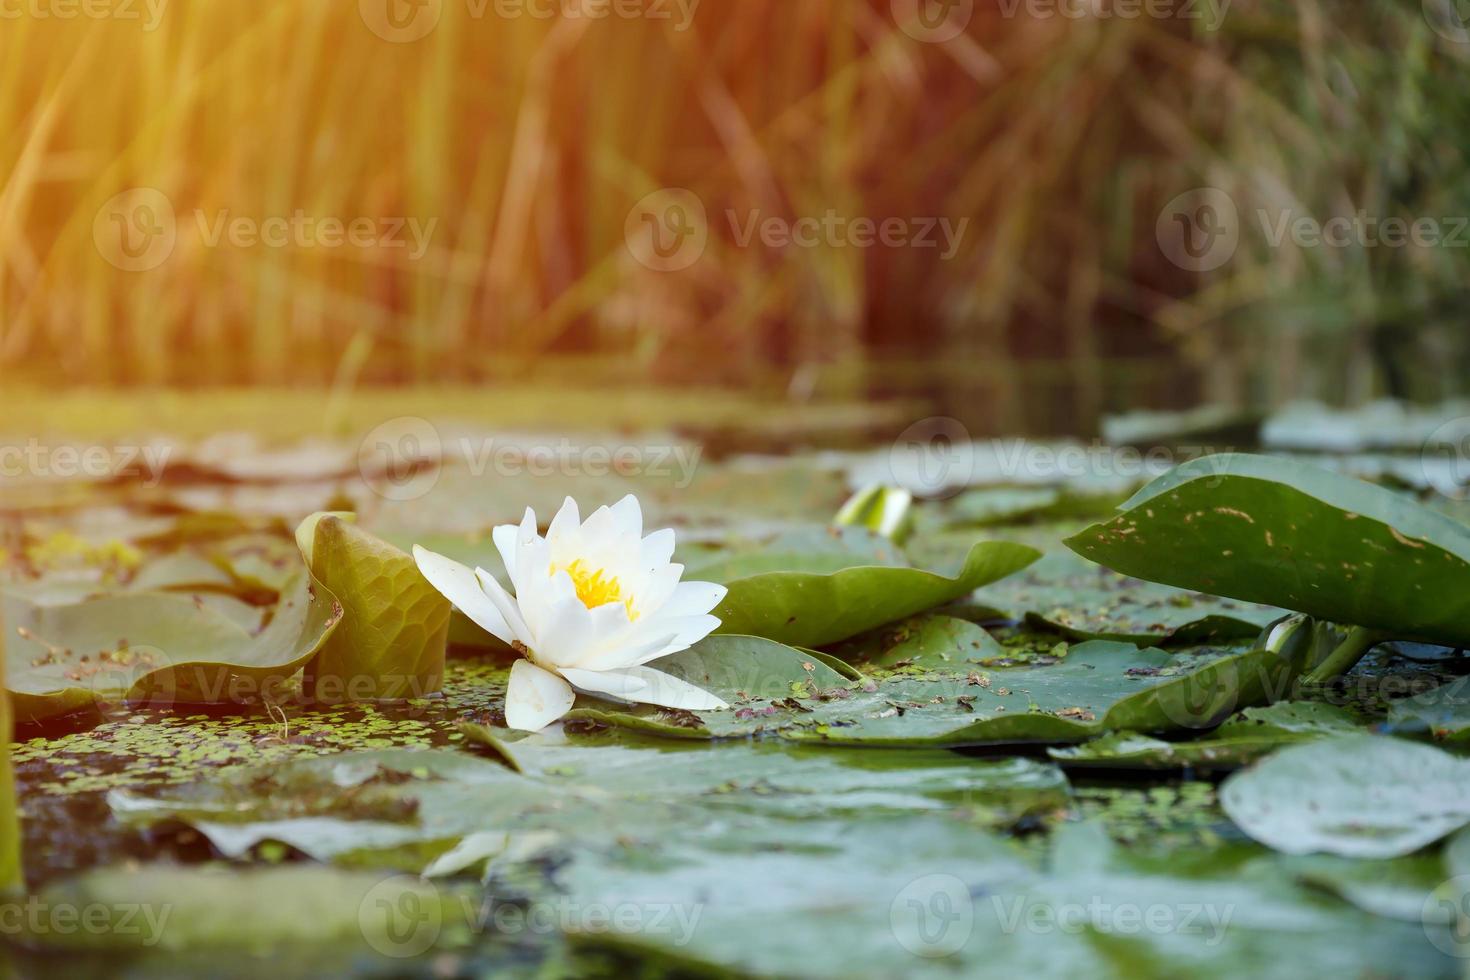 White lotus flower with yellow pollen on water surface photo